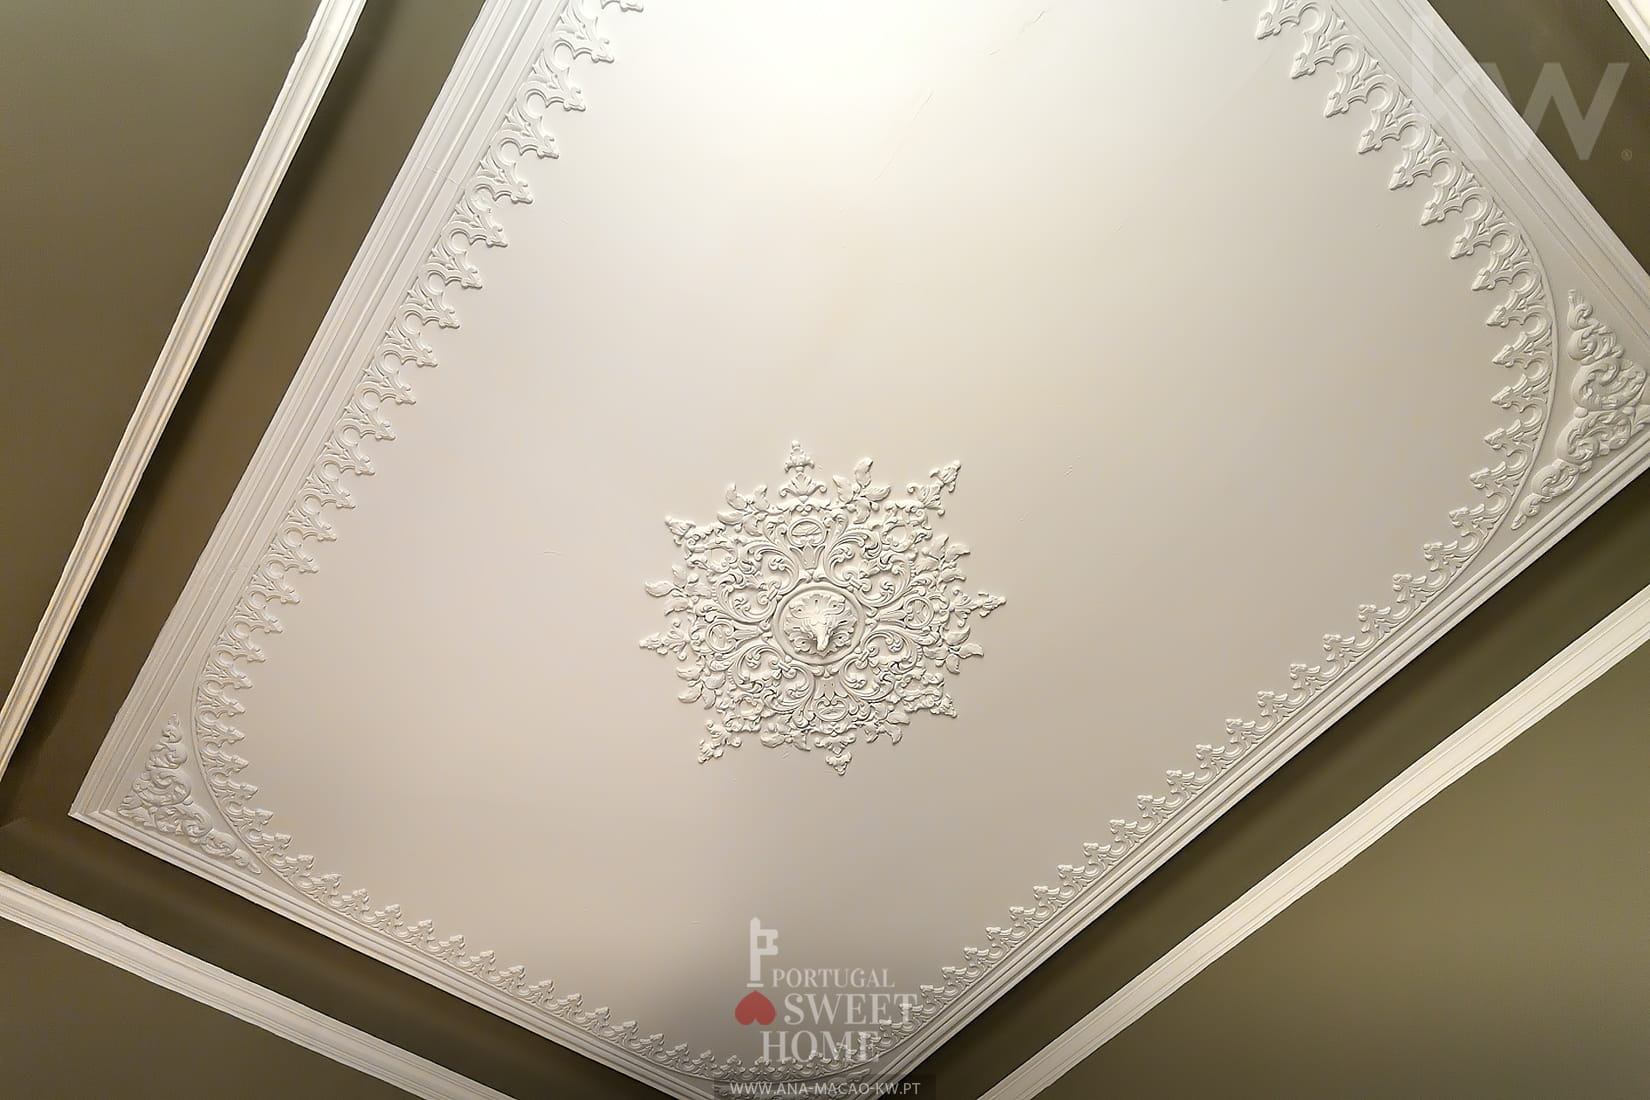 Office ceiling detail